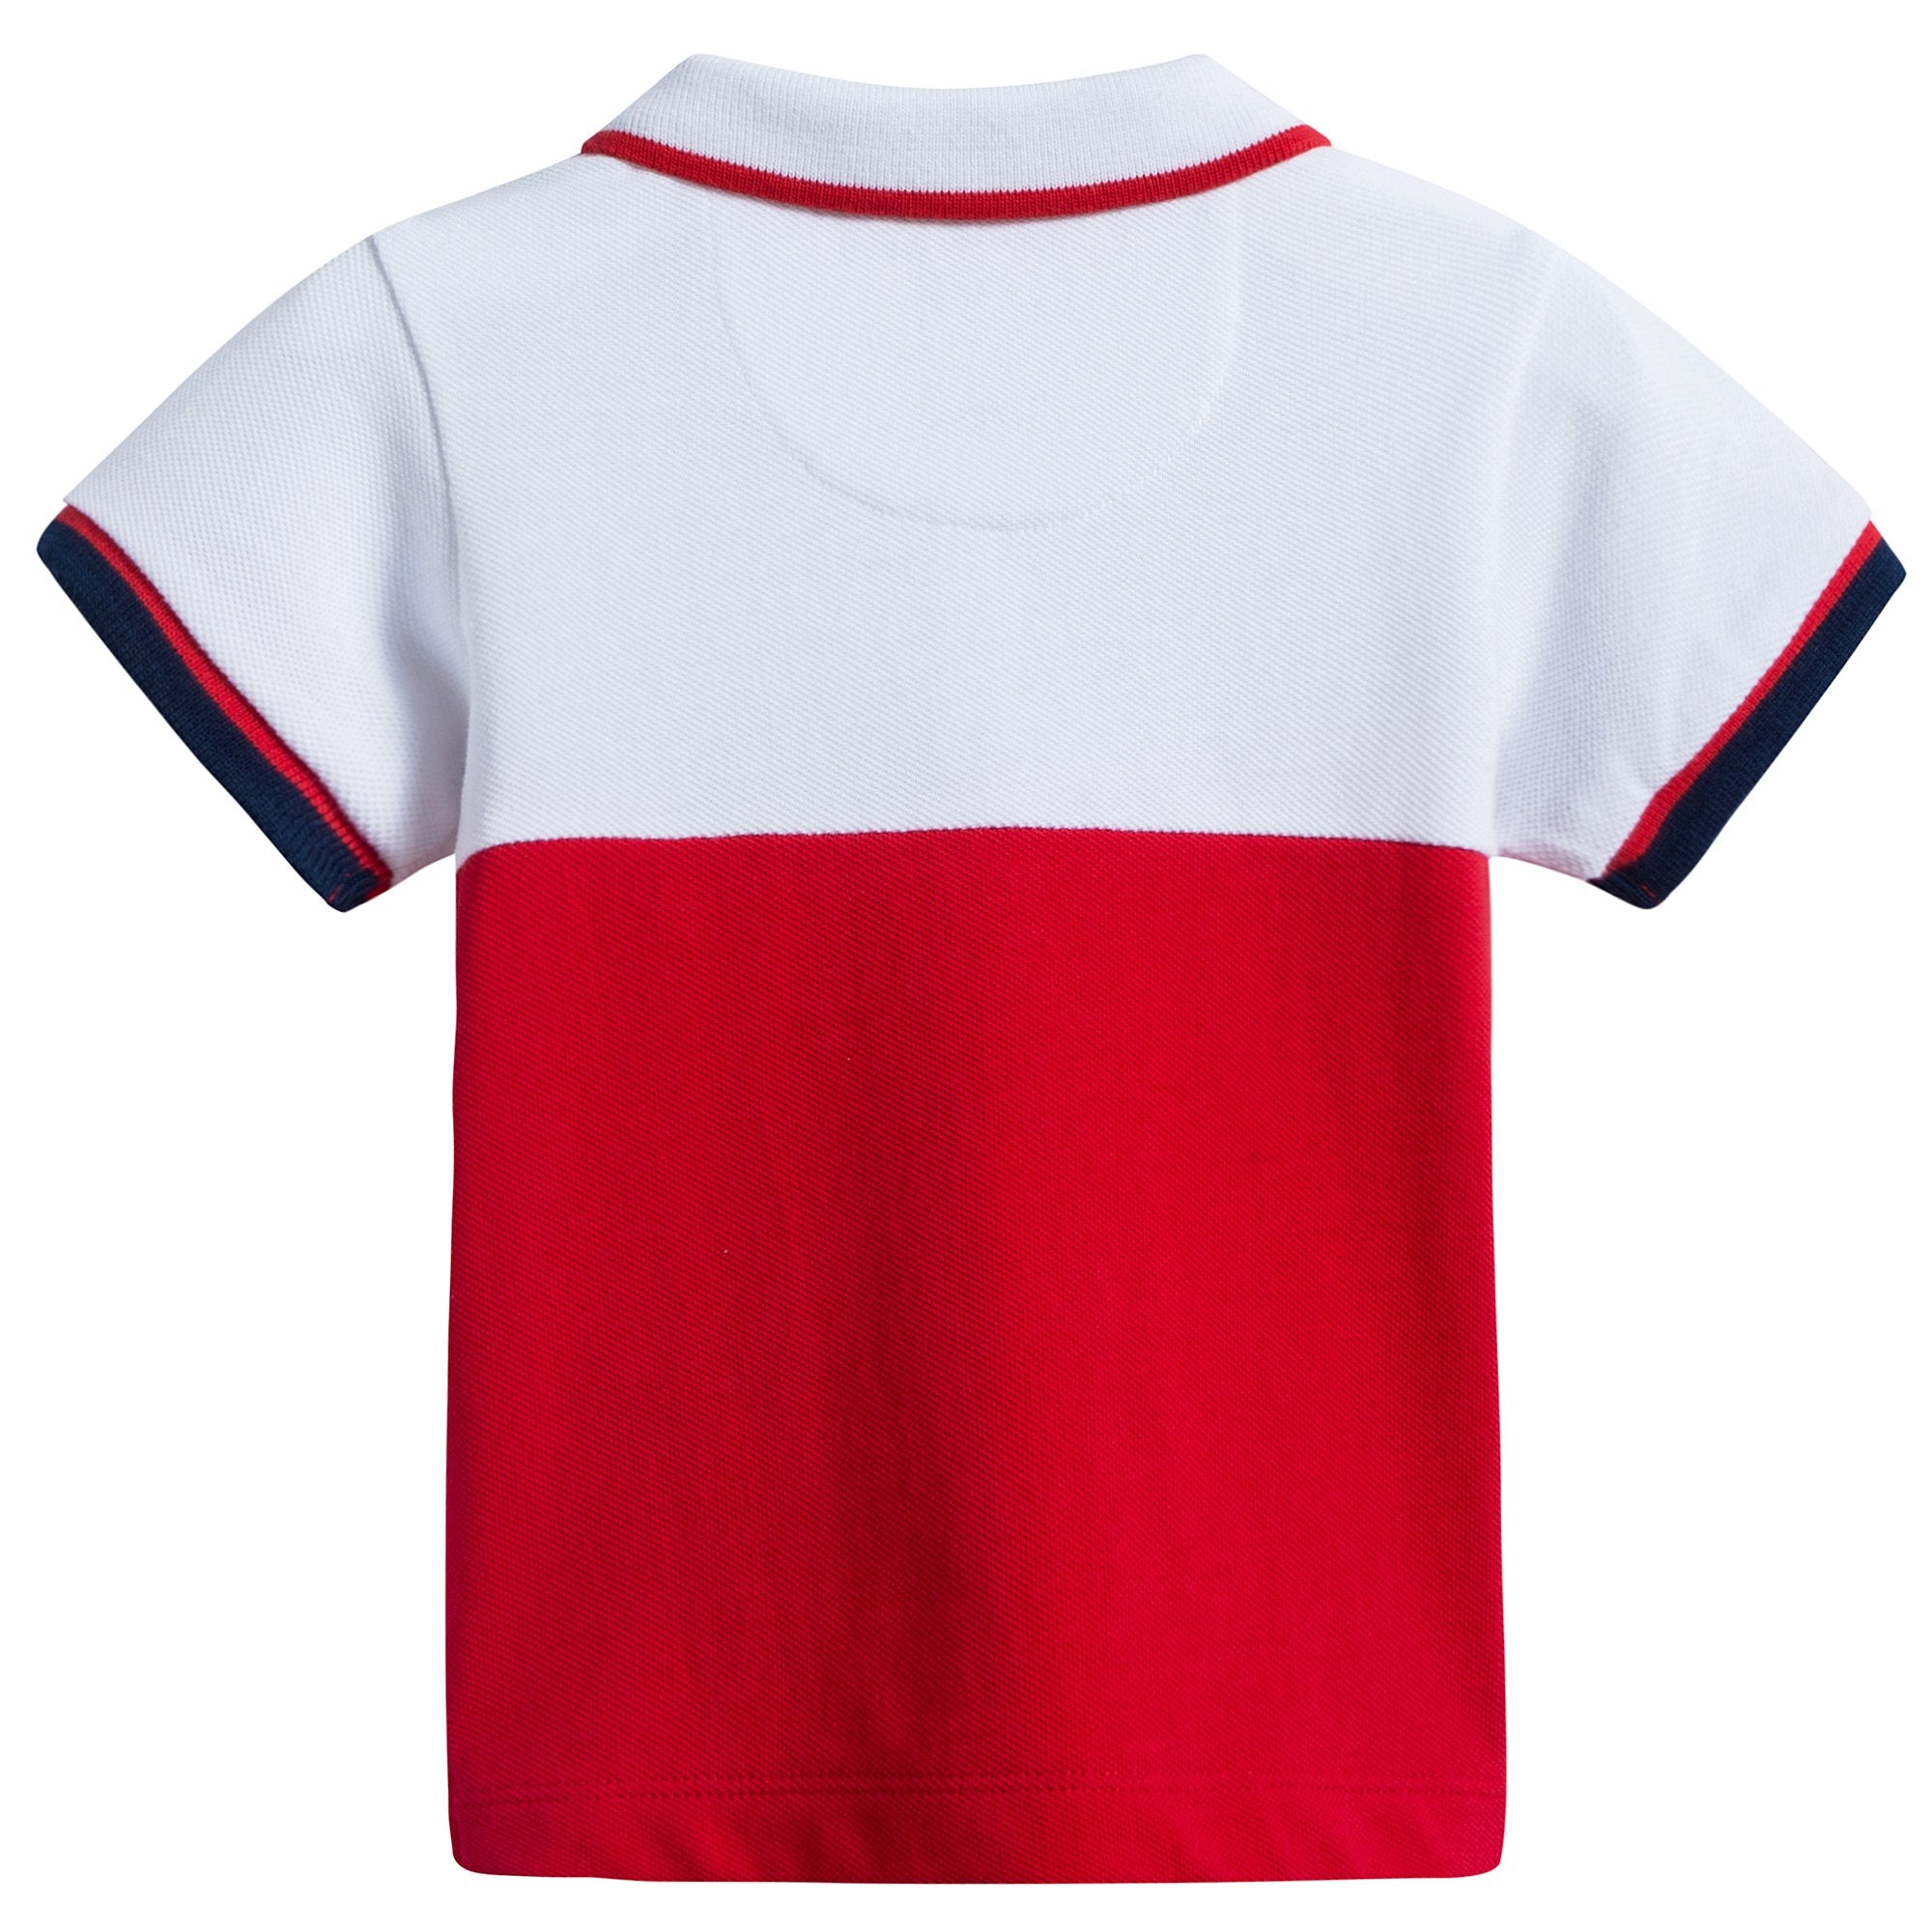 Baby Boys Bright Oringe Red Cotton Polo T-Shirt